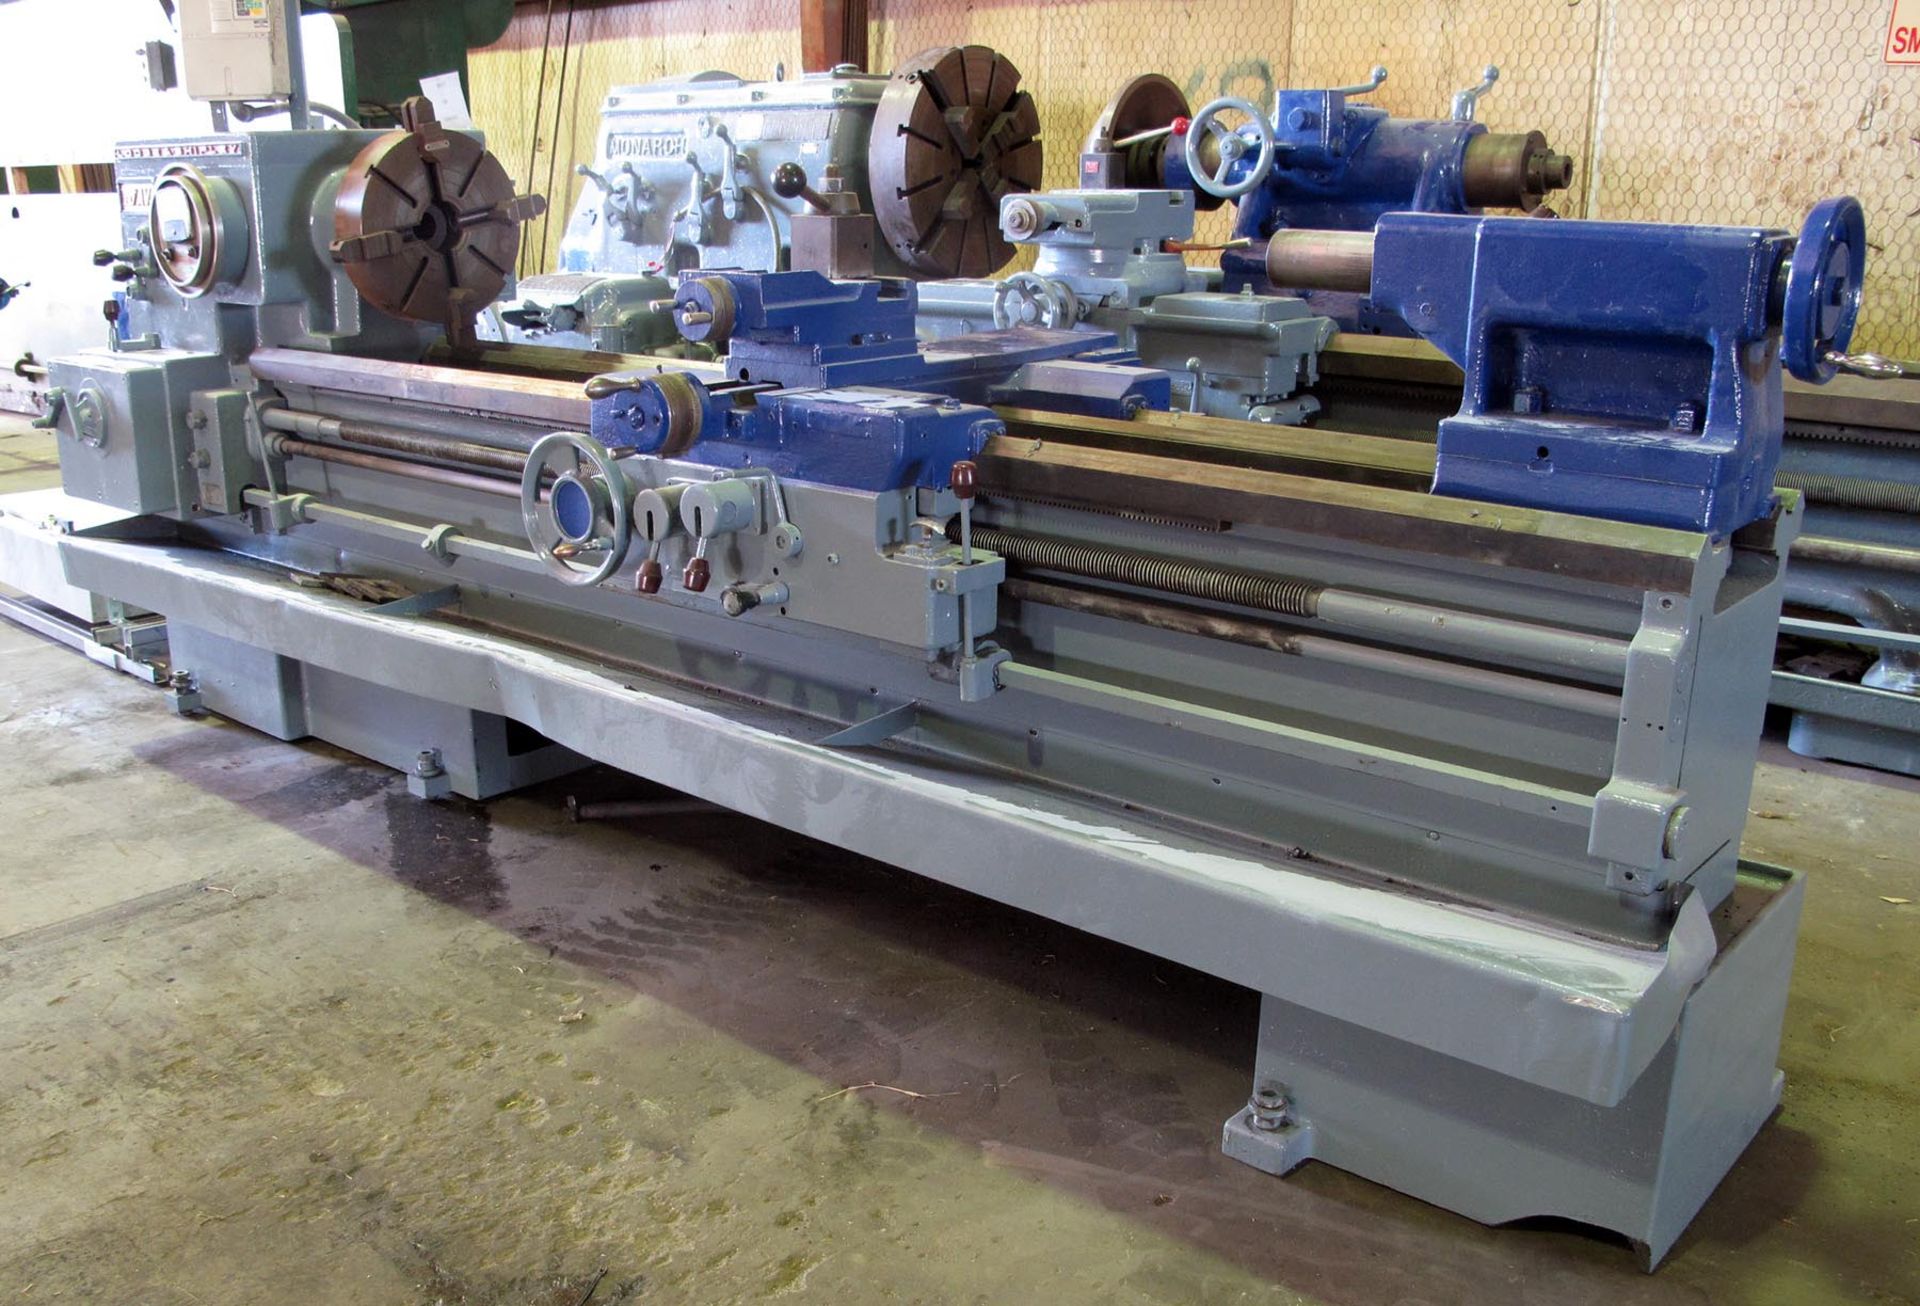 ENGINE LATHE, LODGE & SHIPLEY 20" X 54", Mdl. AVS-2013, 20.5" sw. over bed, 13.5" sw. over